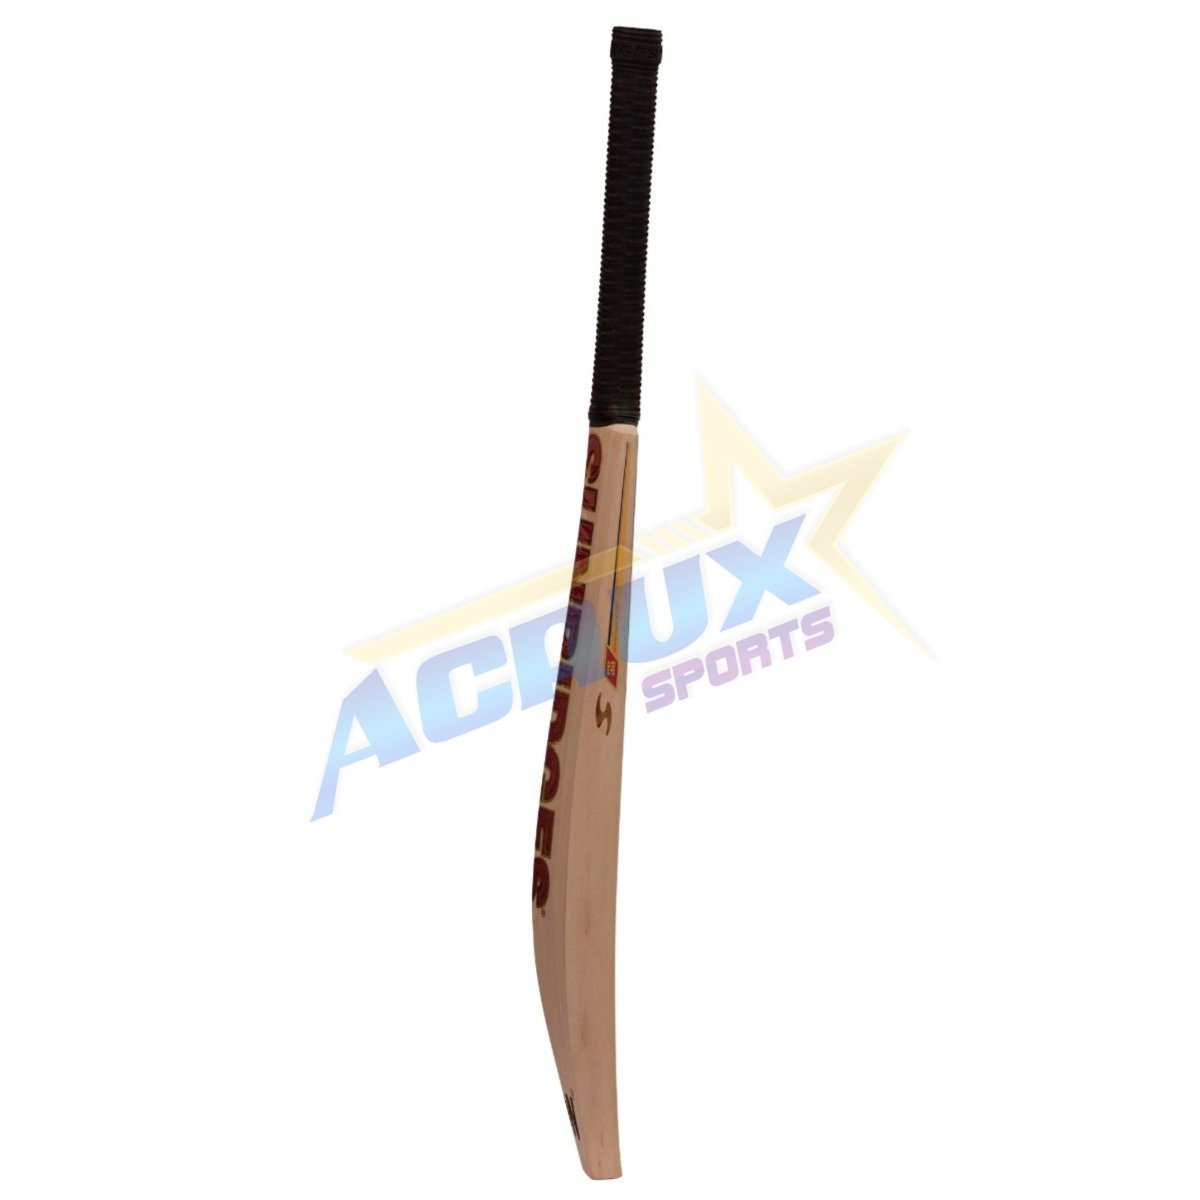 SS Vintage Finisher 7 English Willow Cricket Bat.